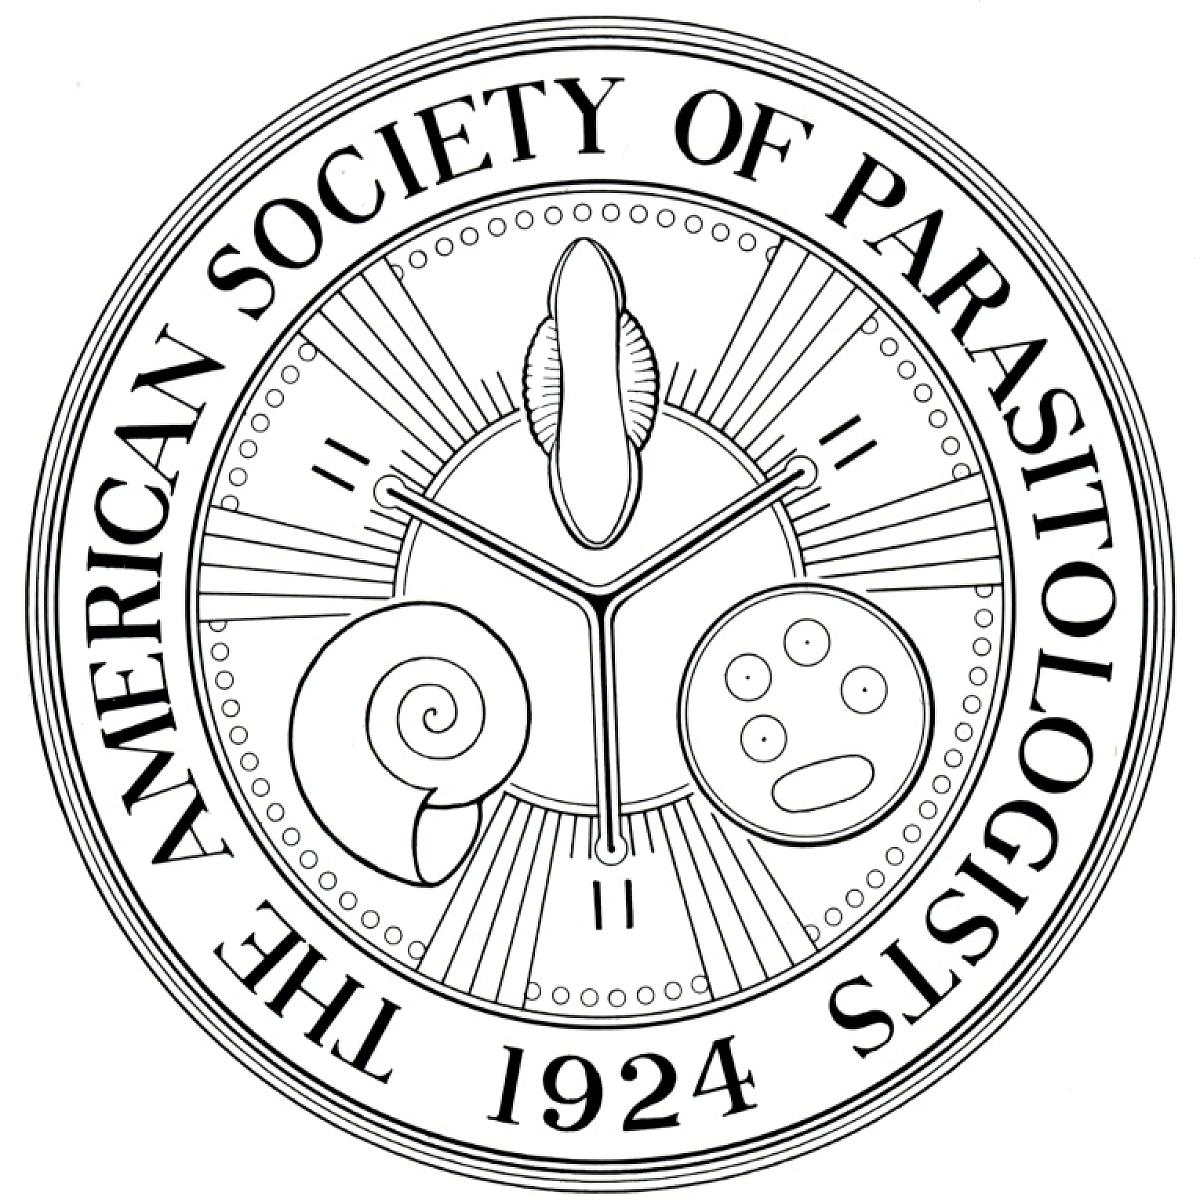 The American Society of Parasitologists logo